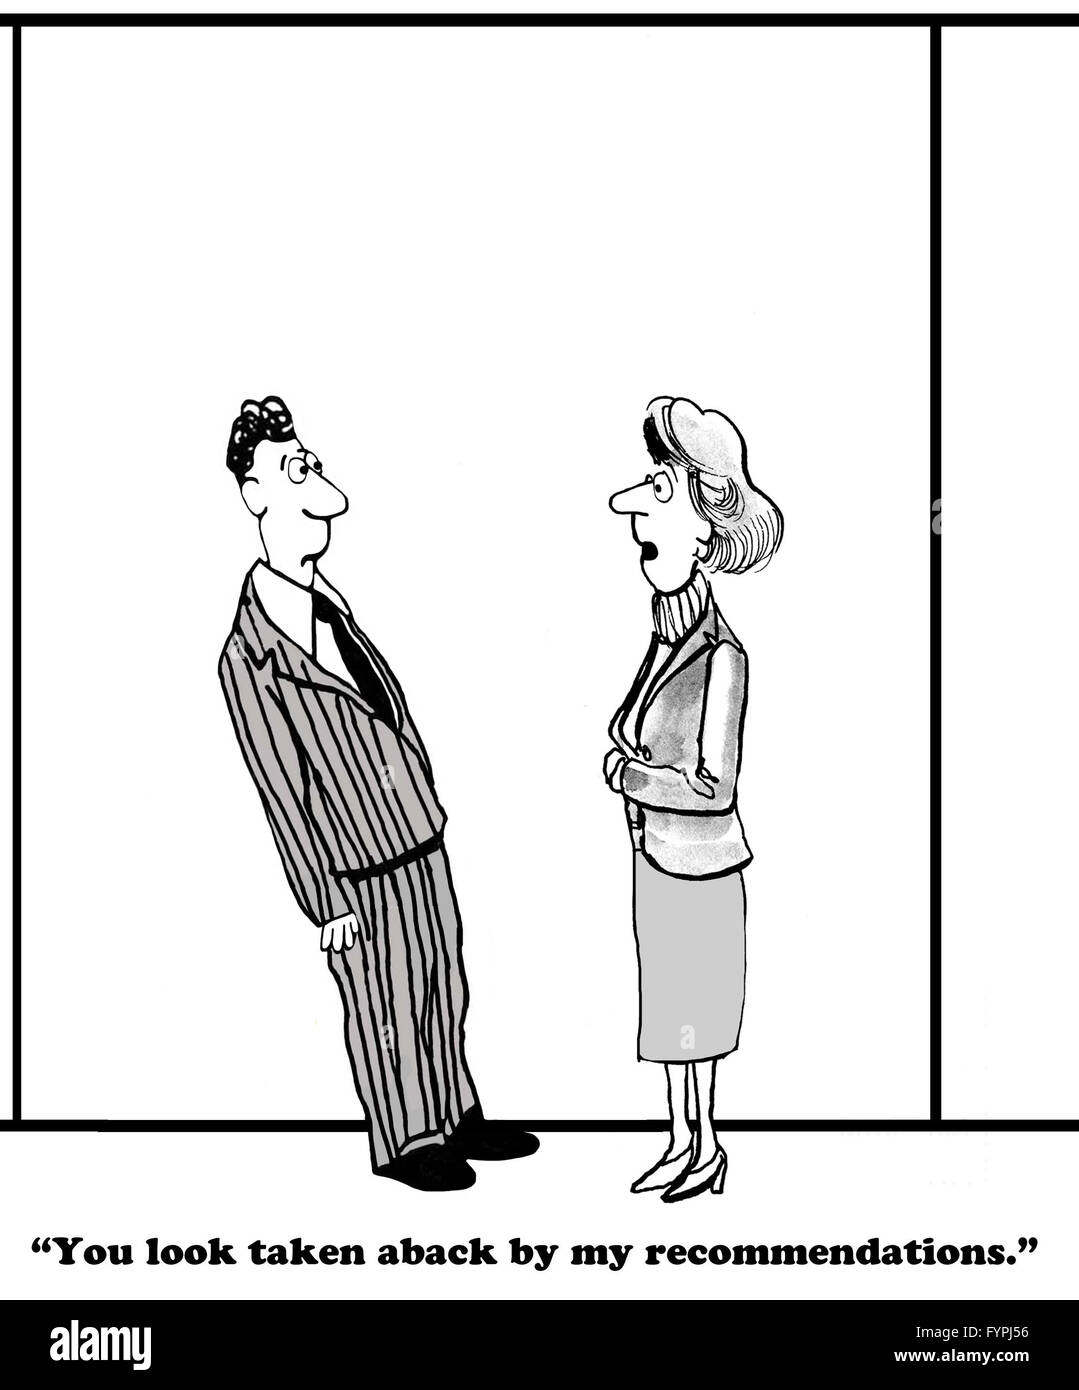 Business cartoon about being taken aback by an unexpected recommendation. Stock Photo